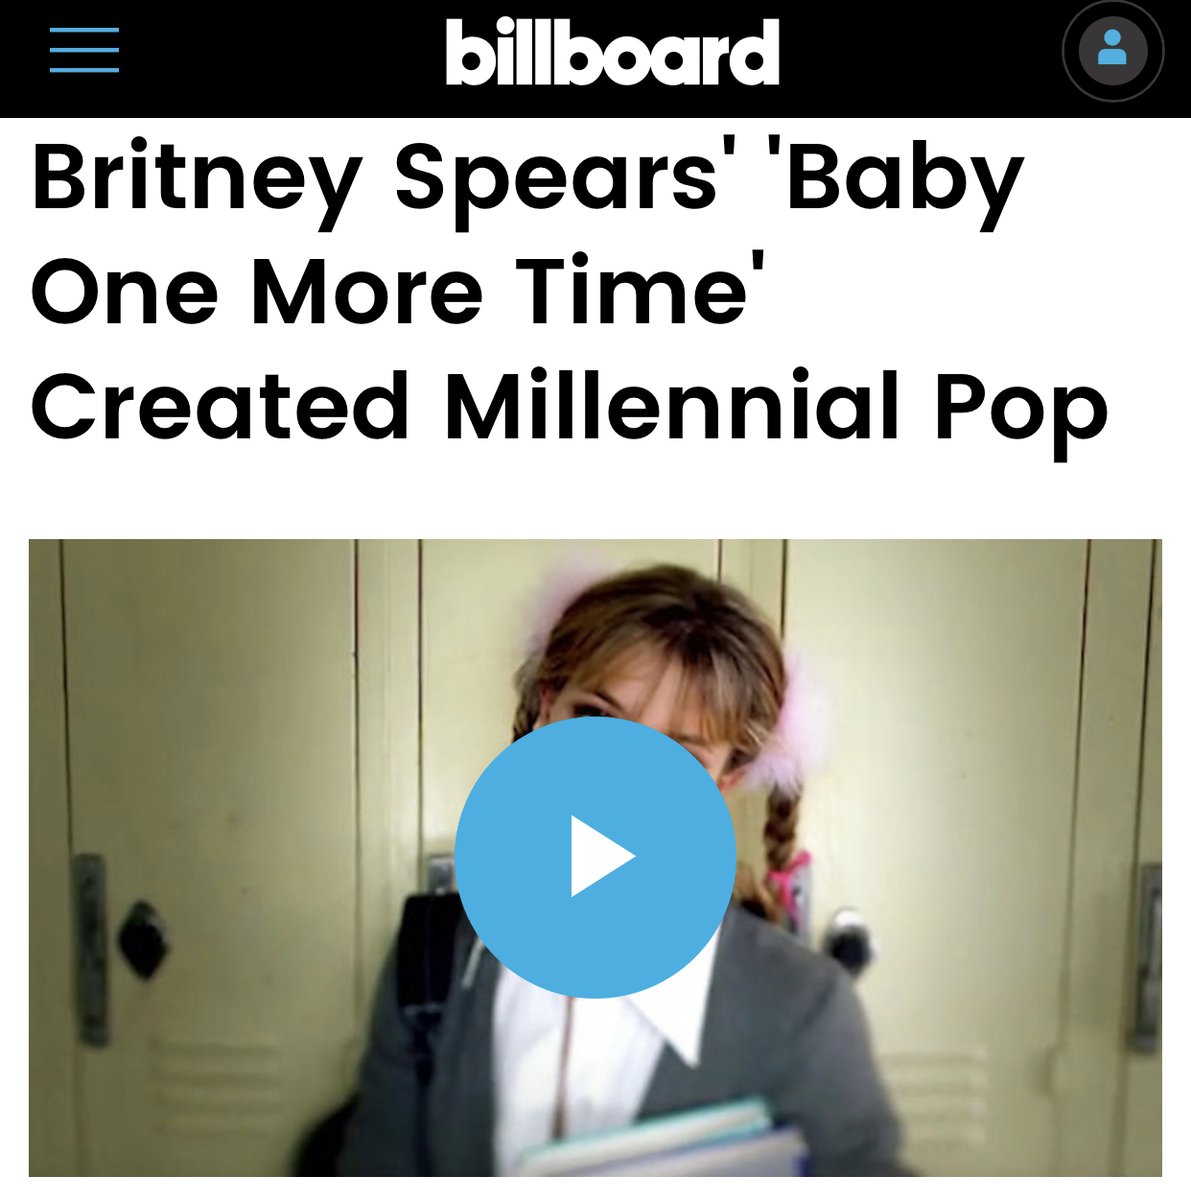 Billboard compared the impact of Britney with that of Michael Jackson and The Beatles. "Her debut single was a watershed in pop music; like similar game changers from MJ or The Beatles, there is pop prior to "...Baby One More Time, and there is pop thereafter."